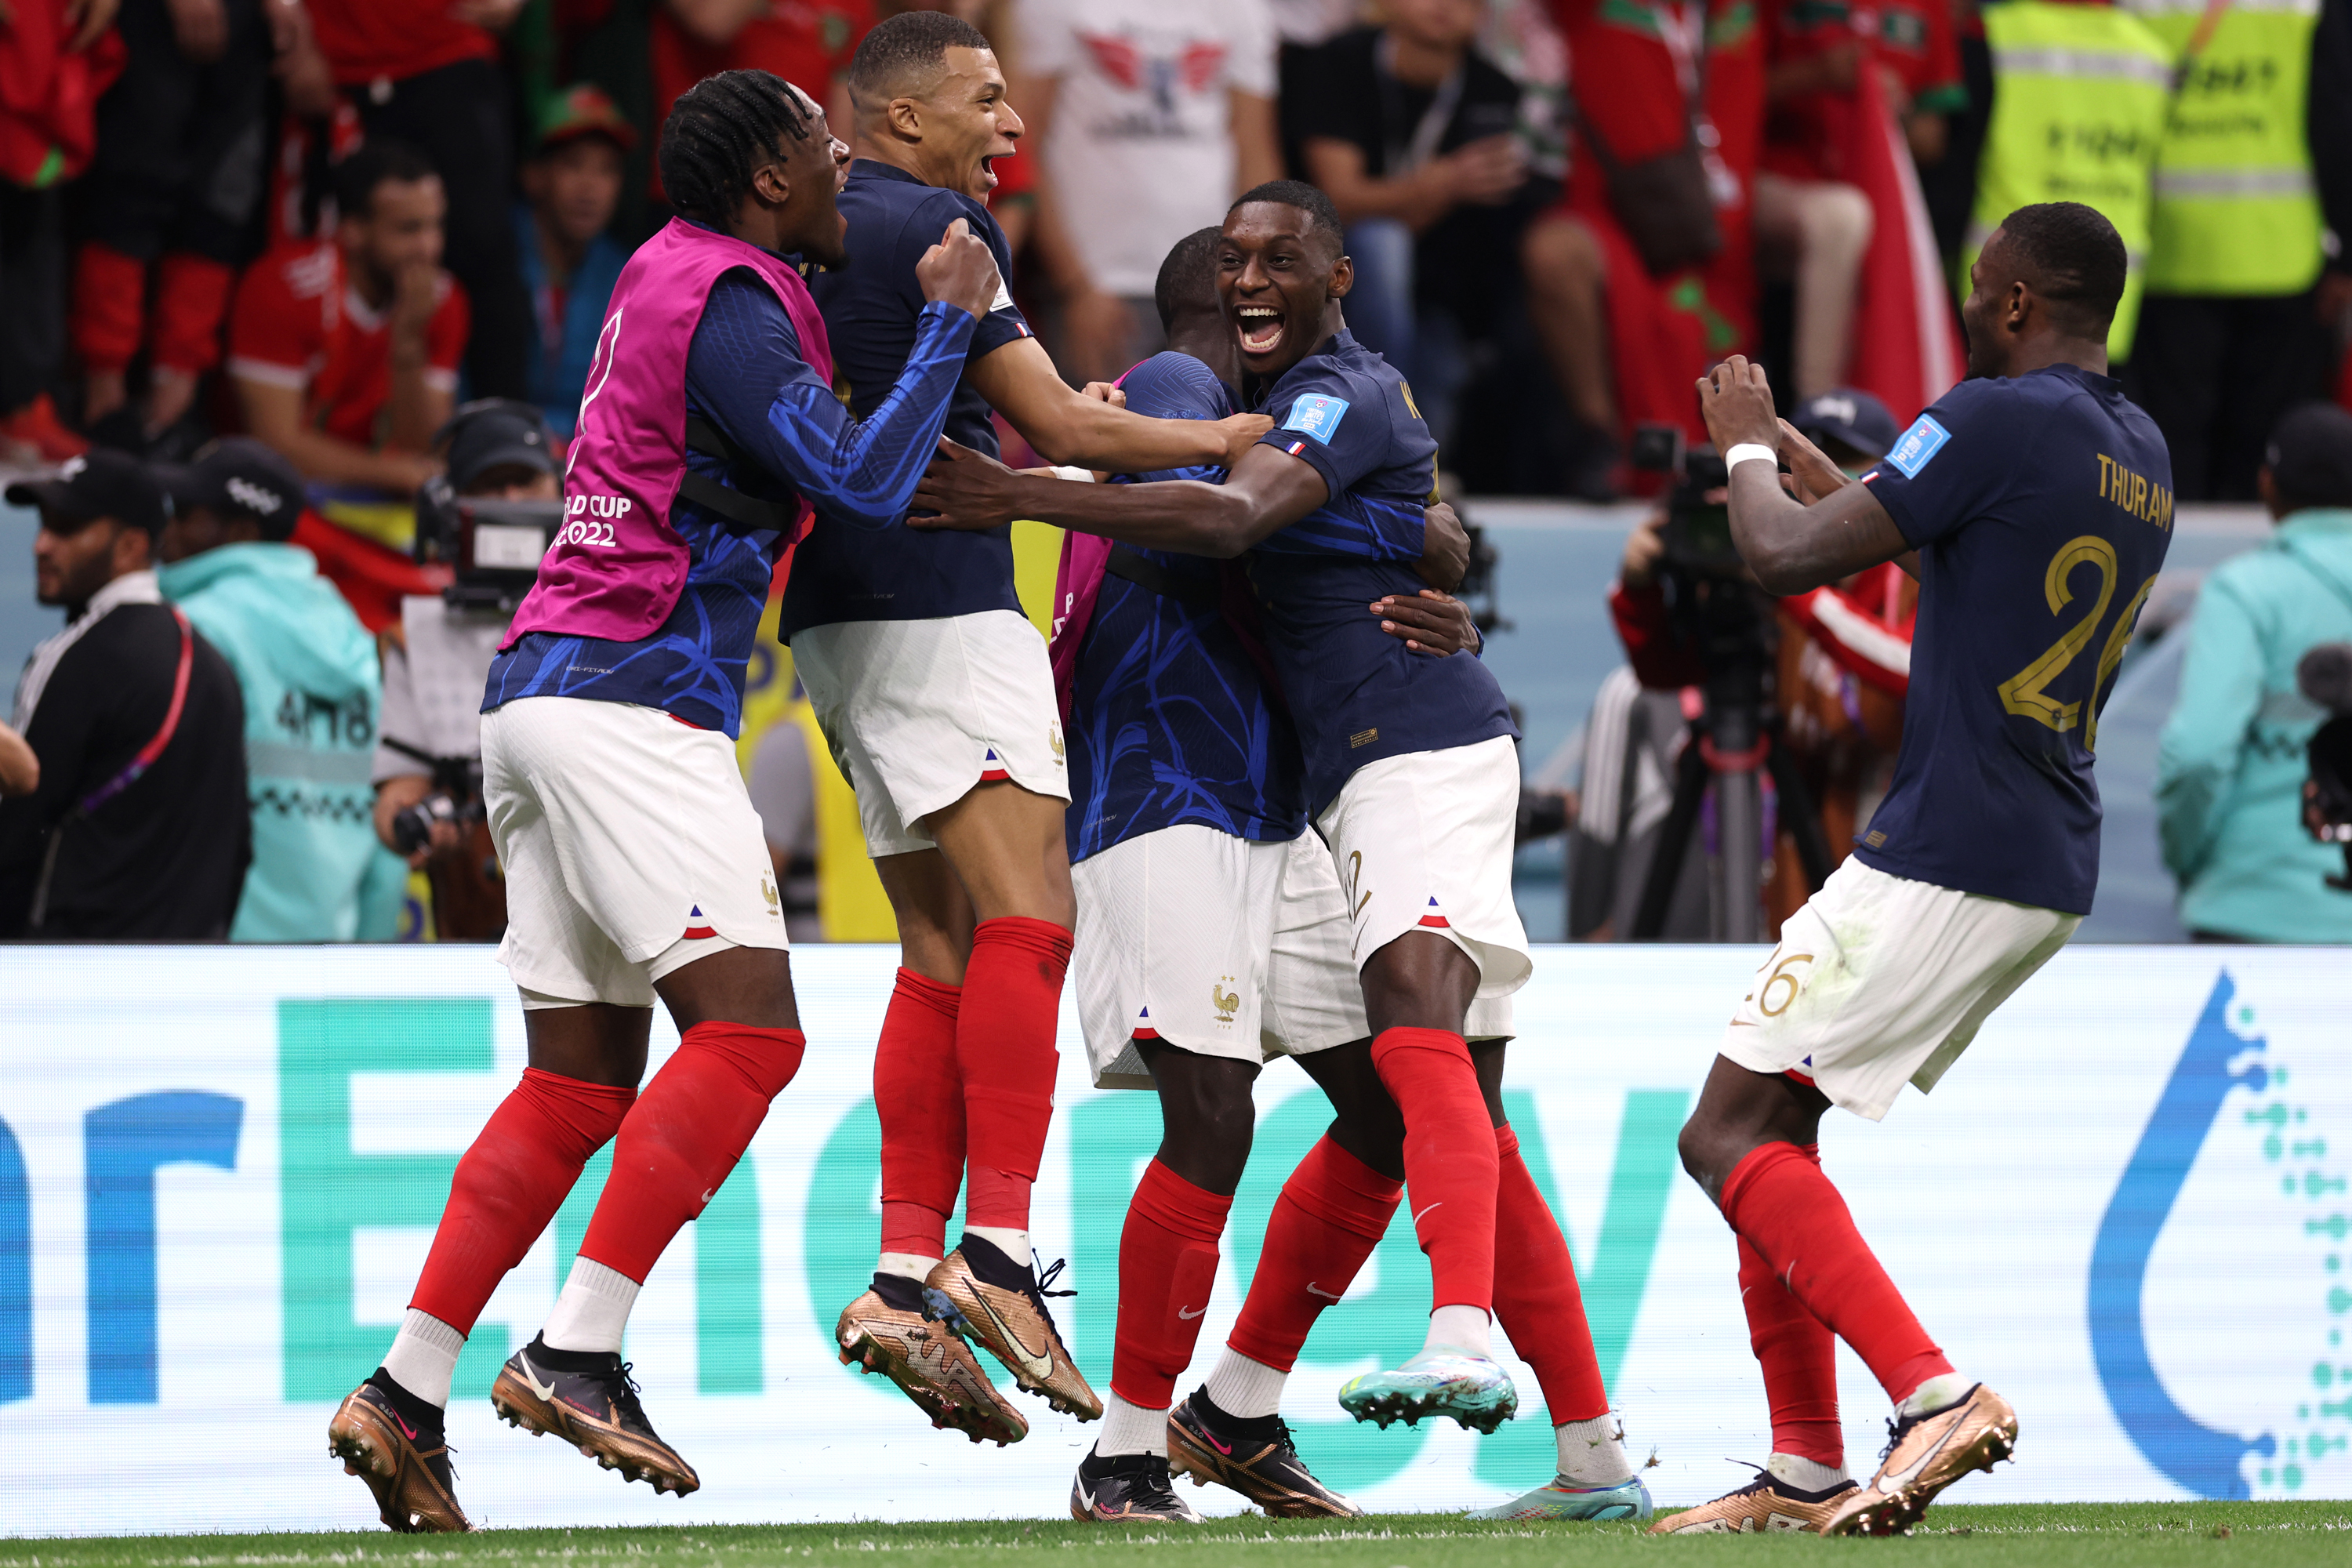 Randal Kolo Muani of France celebrates with teammates after scoring France's second goal during the match against Morocco at Al-Bayt Stadium in Al Khor, Qatar on Wednesday.